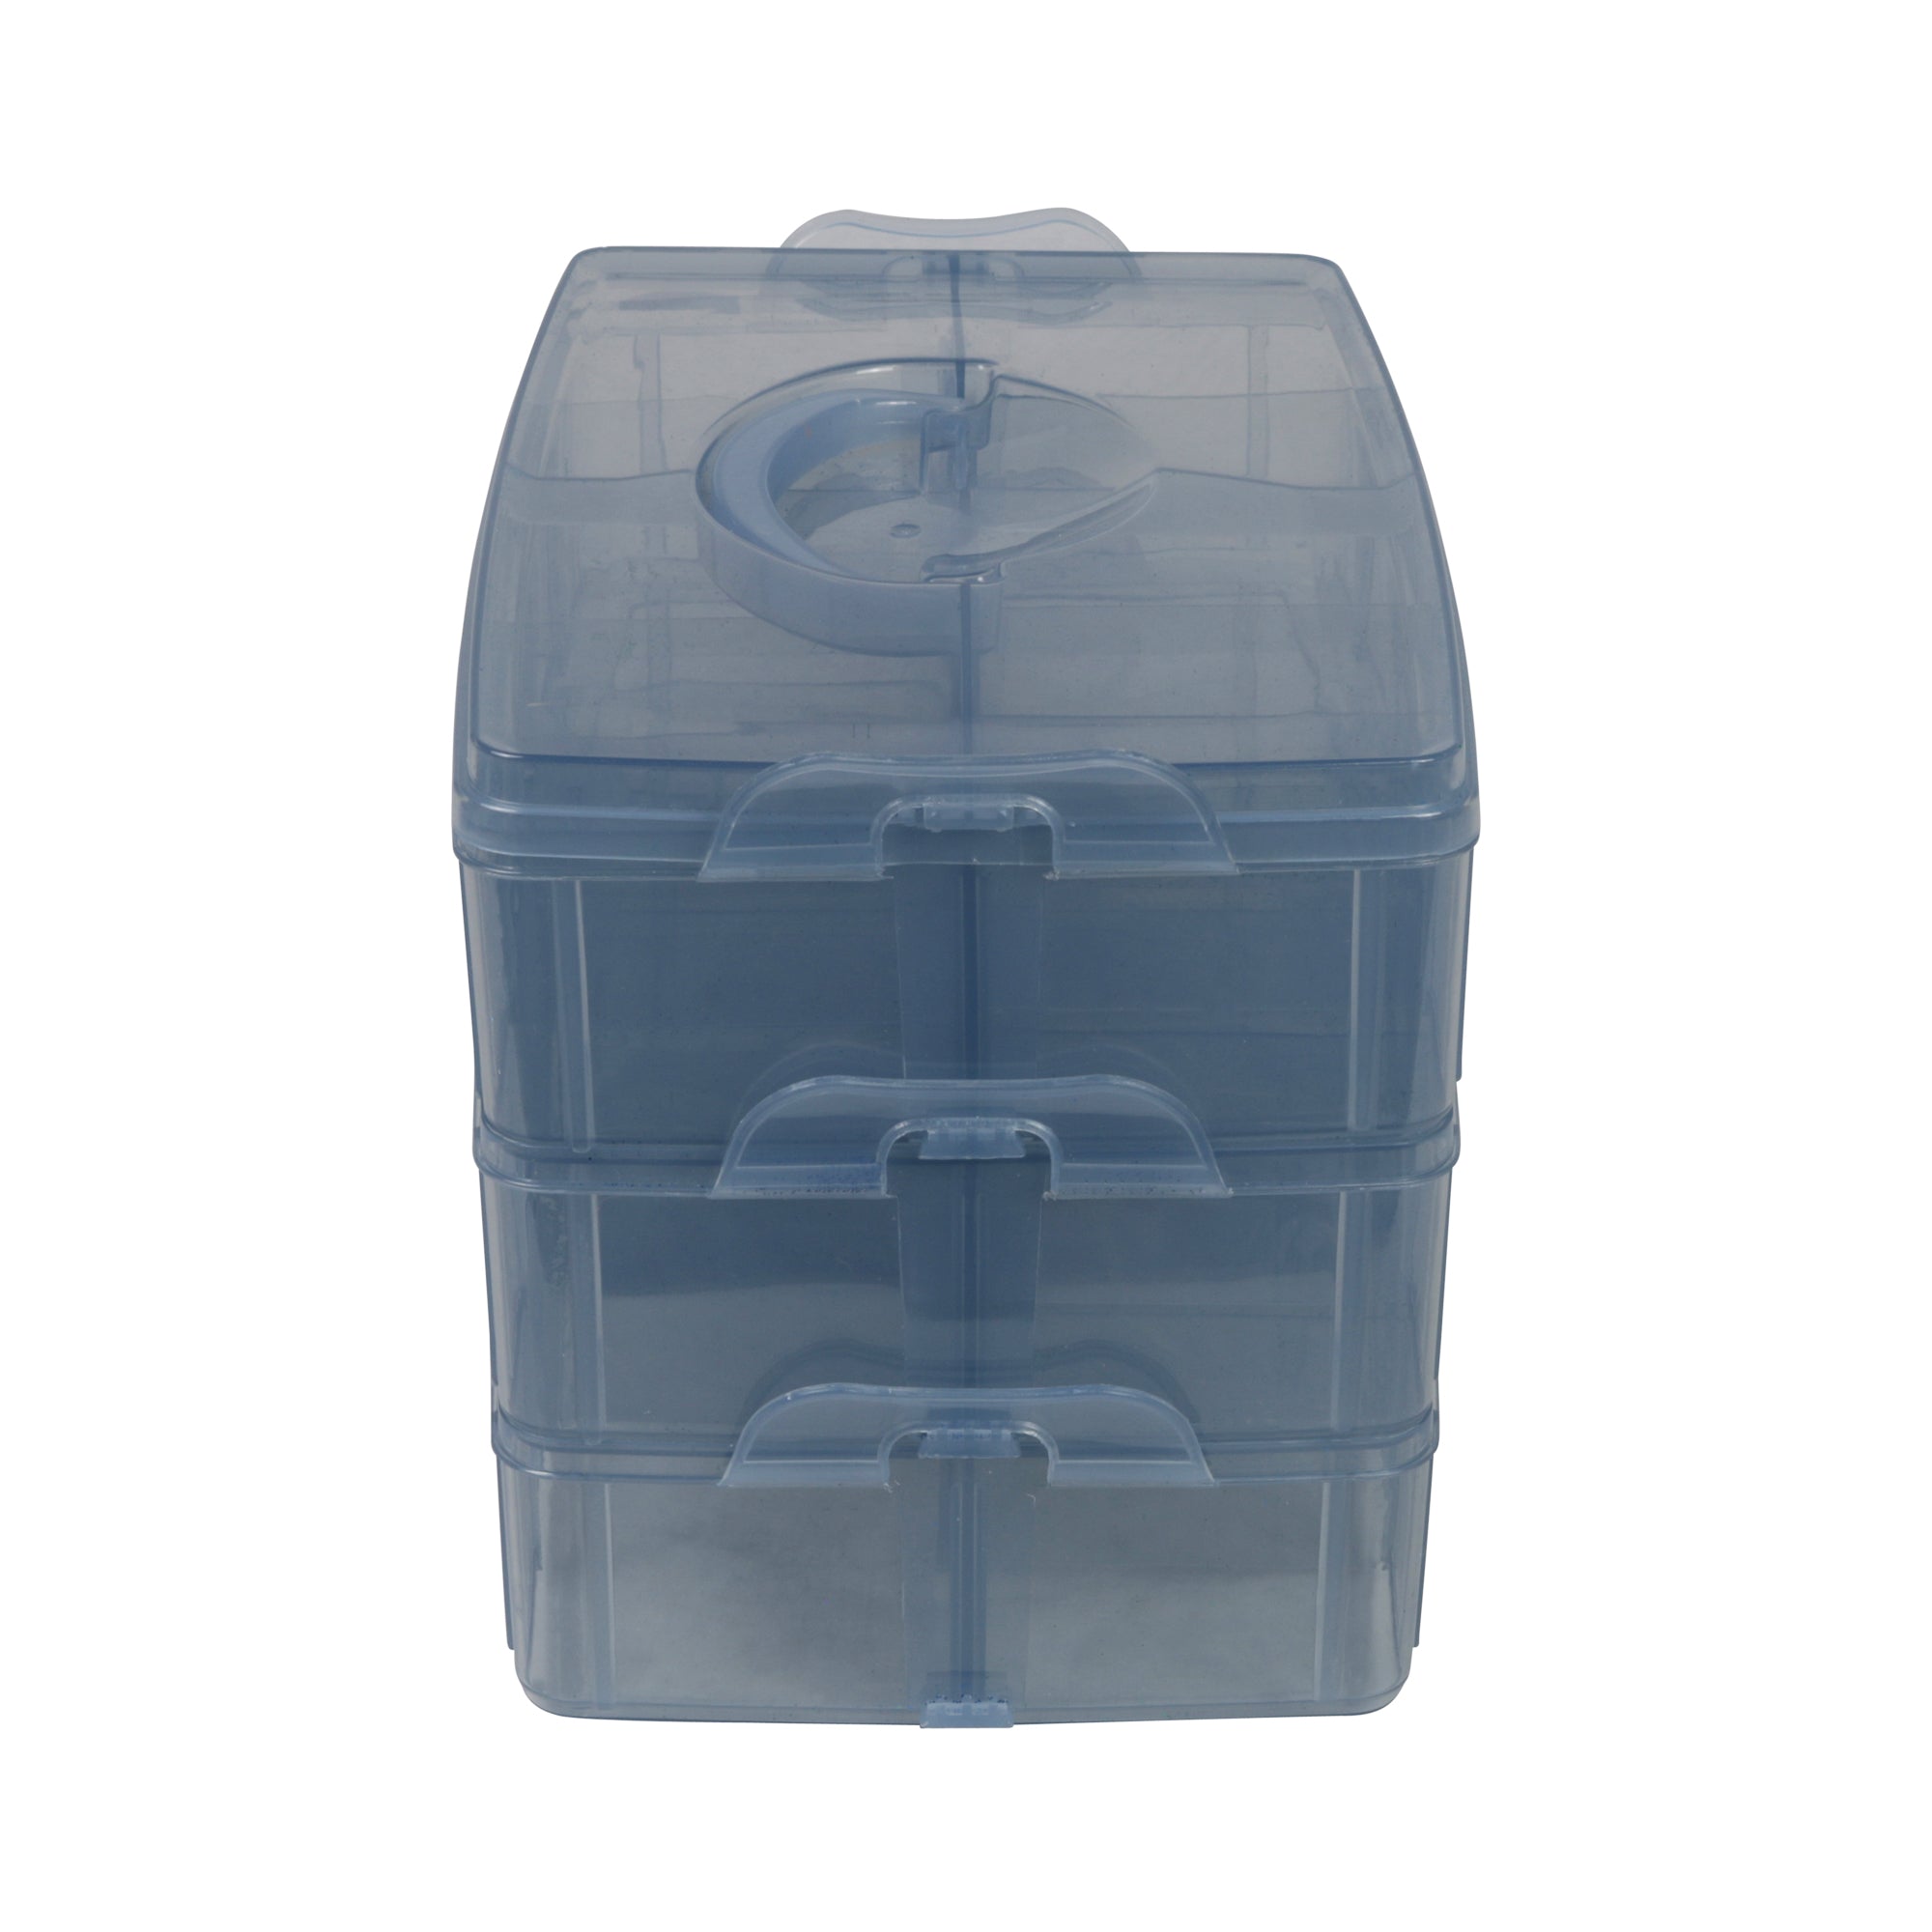 Craft Storage Box with Compartments, Clear 3-Tier 30 Sections